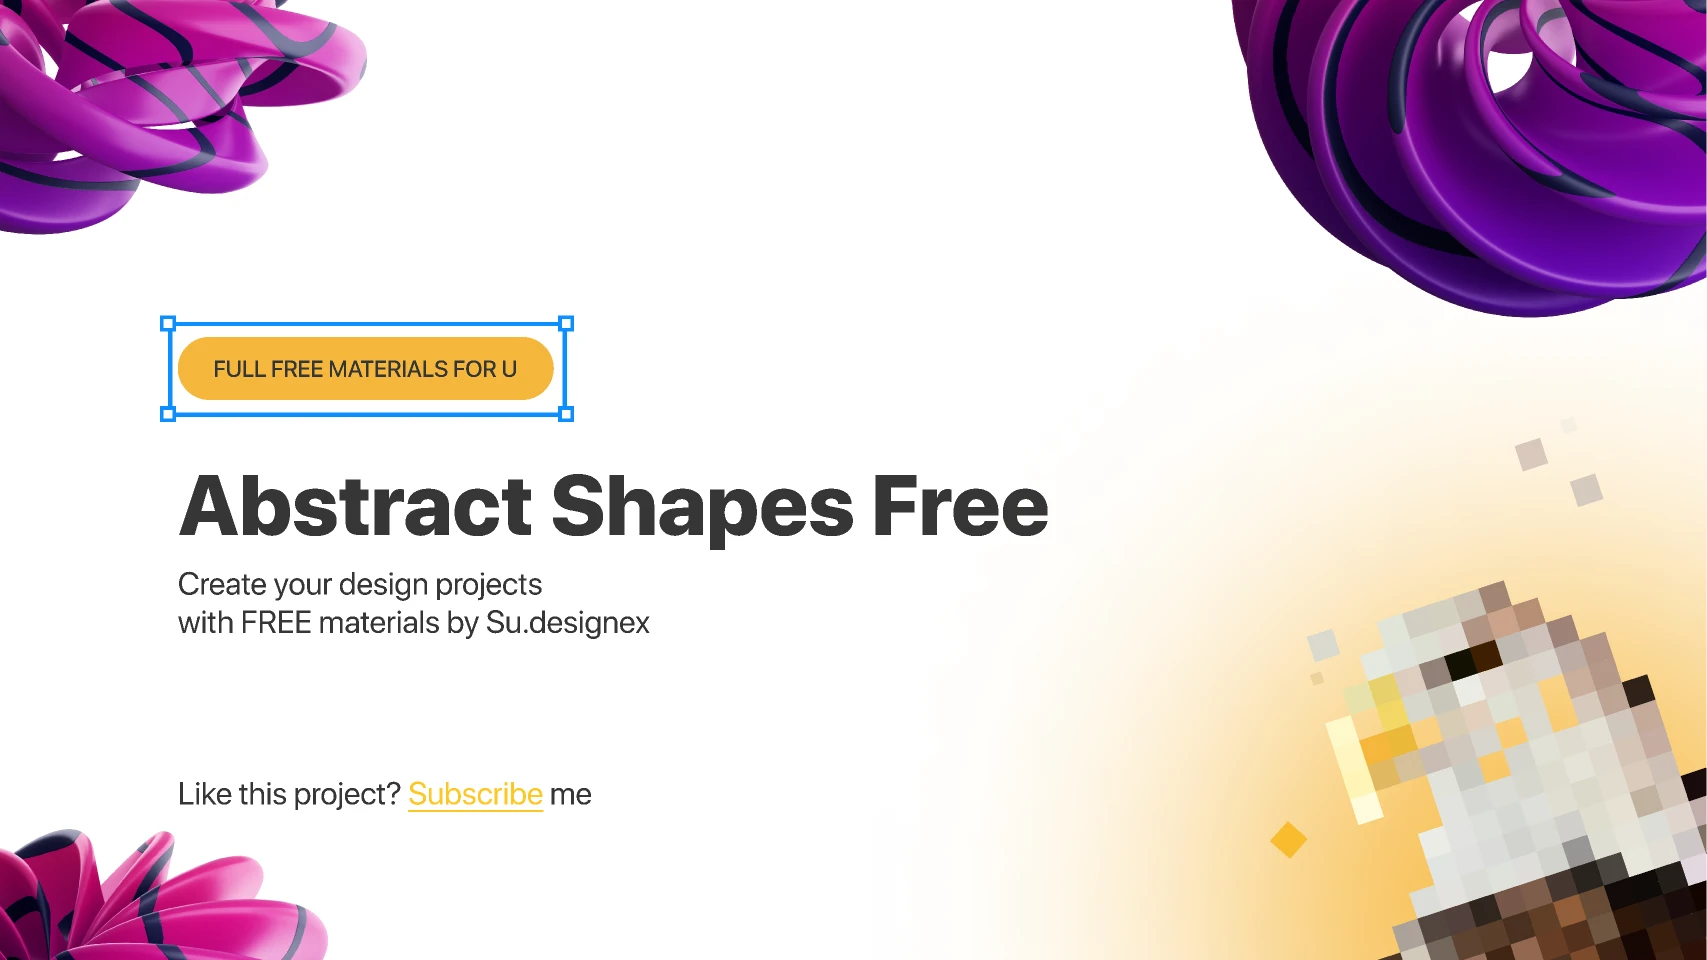 Abstract Shapes Free (Community) for Figma and Adobe XD